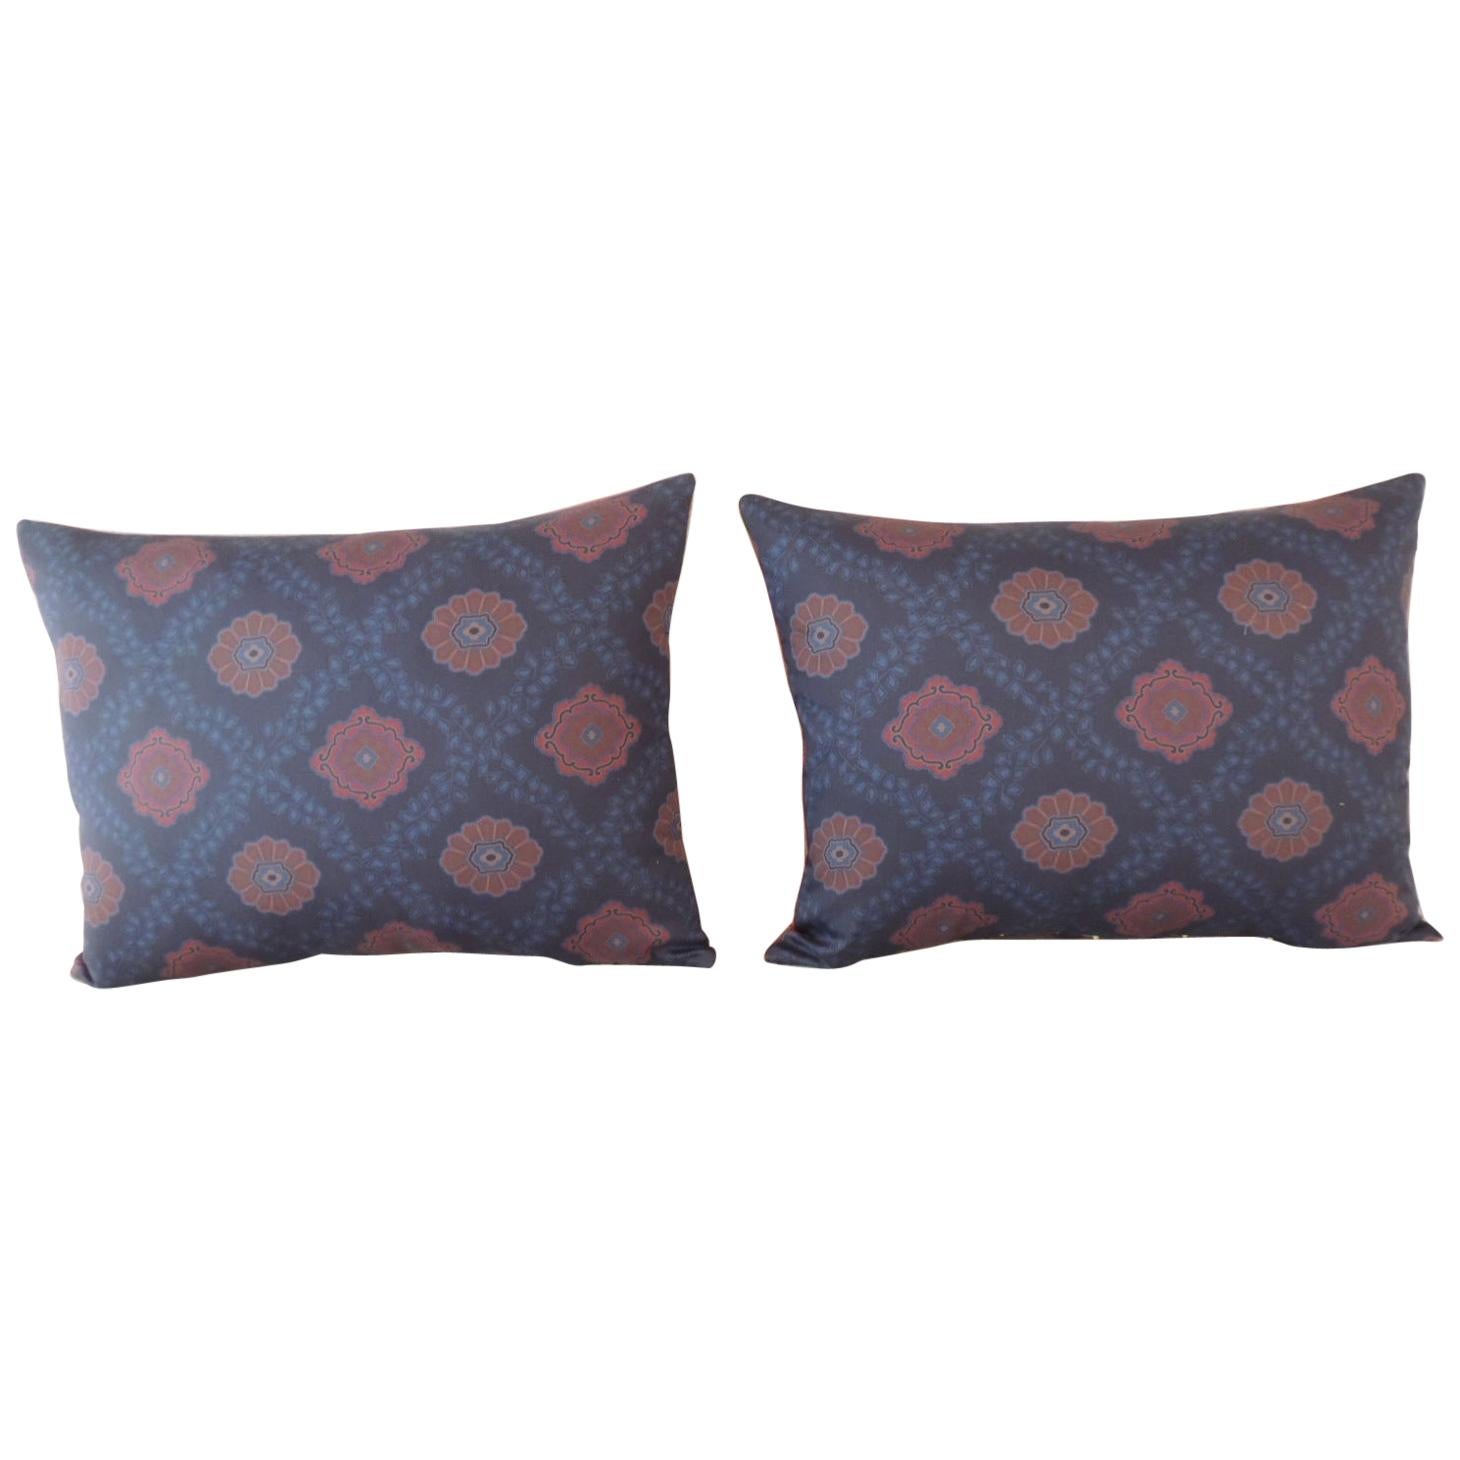 Pair of Red and Blue Satin Cotton Modern Bolster Decorative Pillows